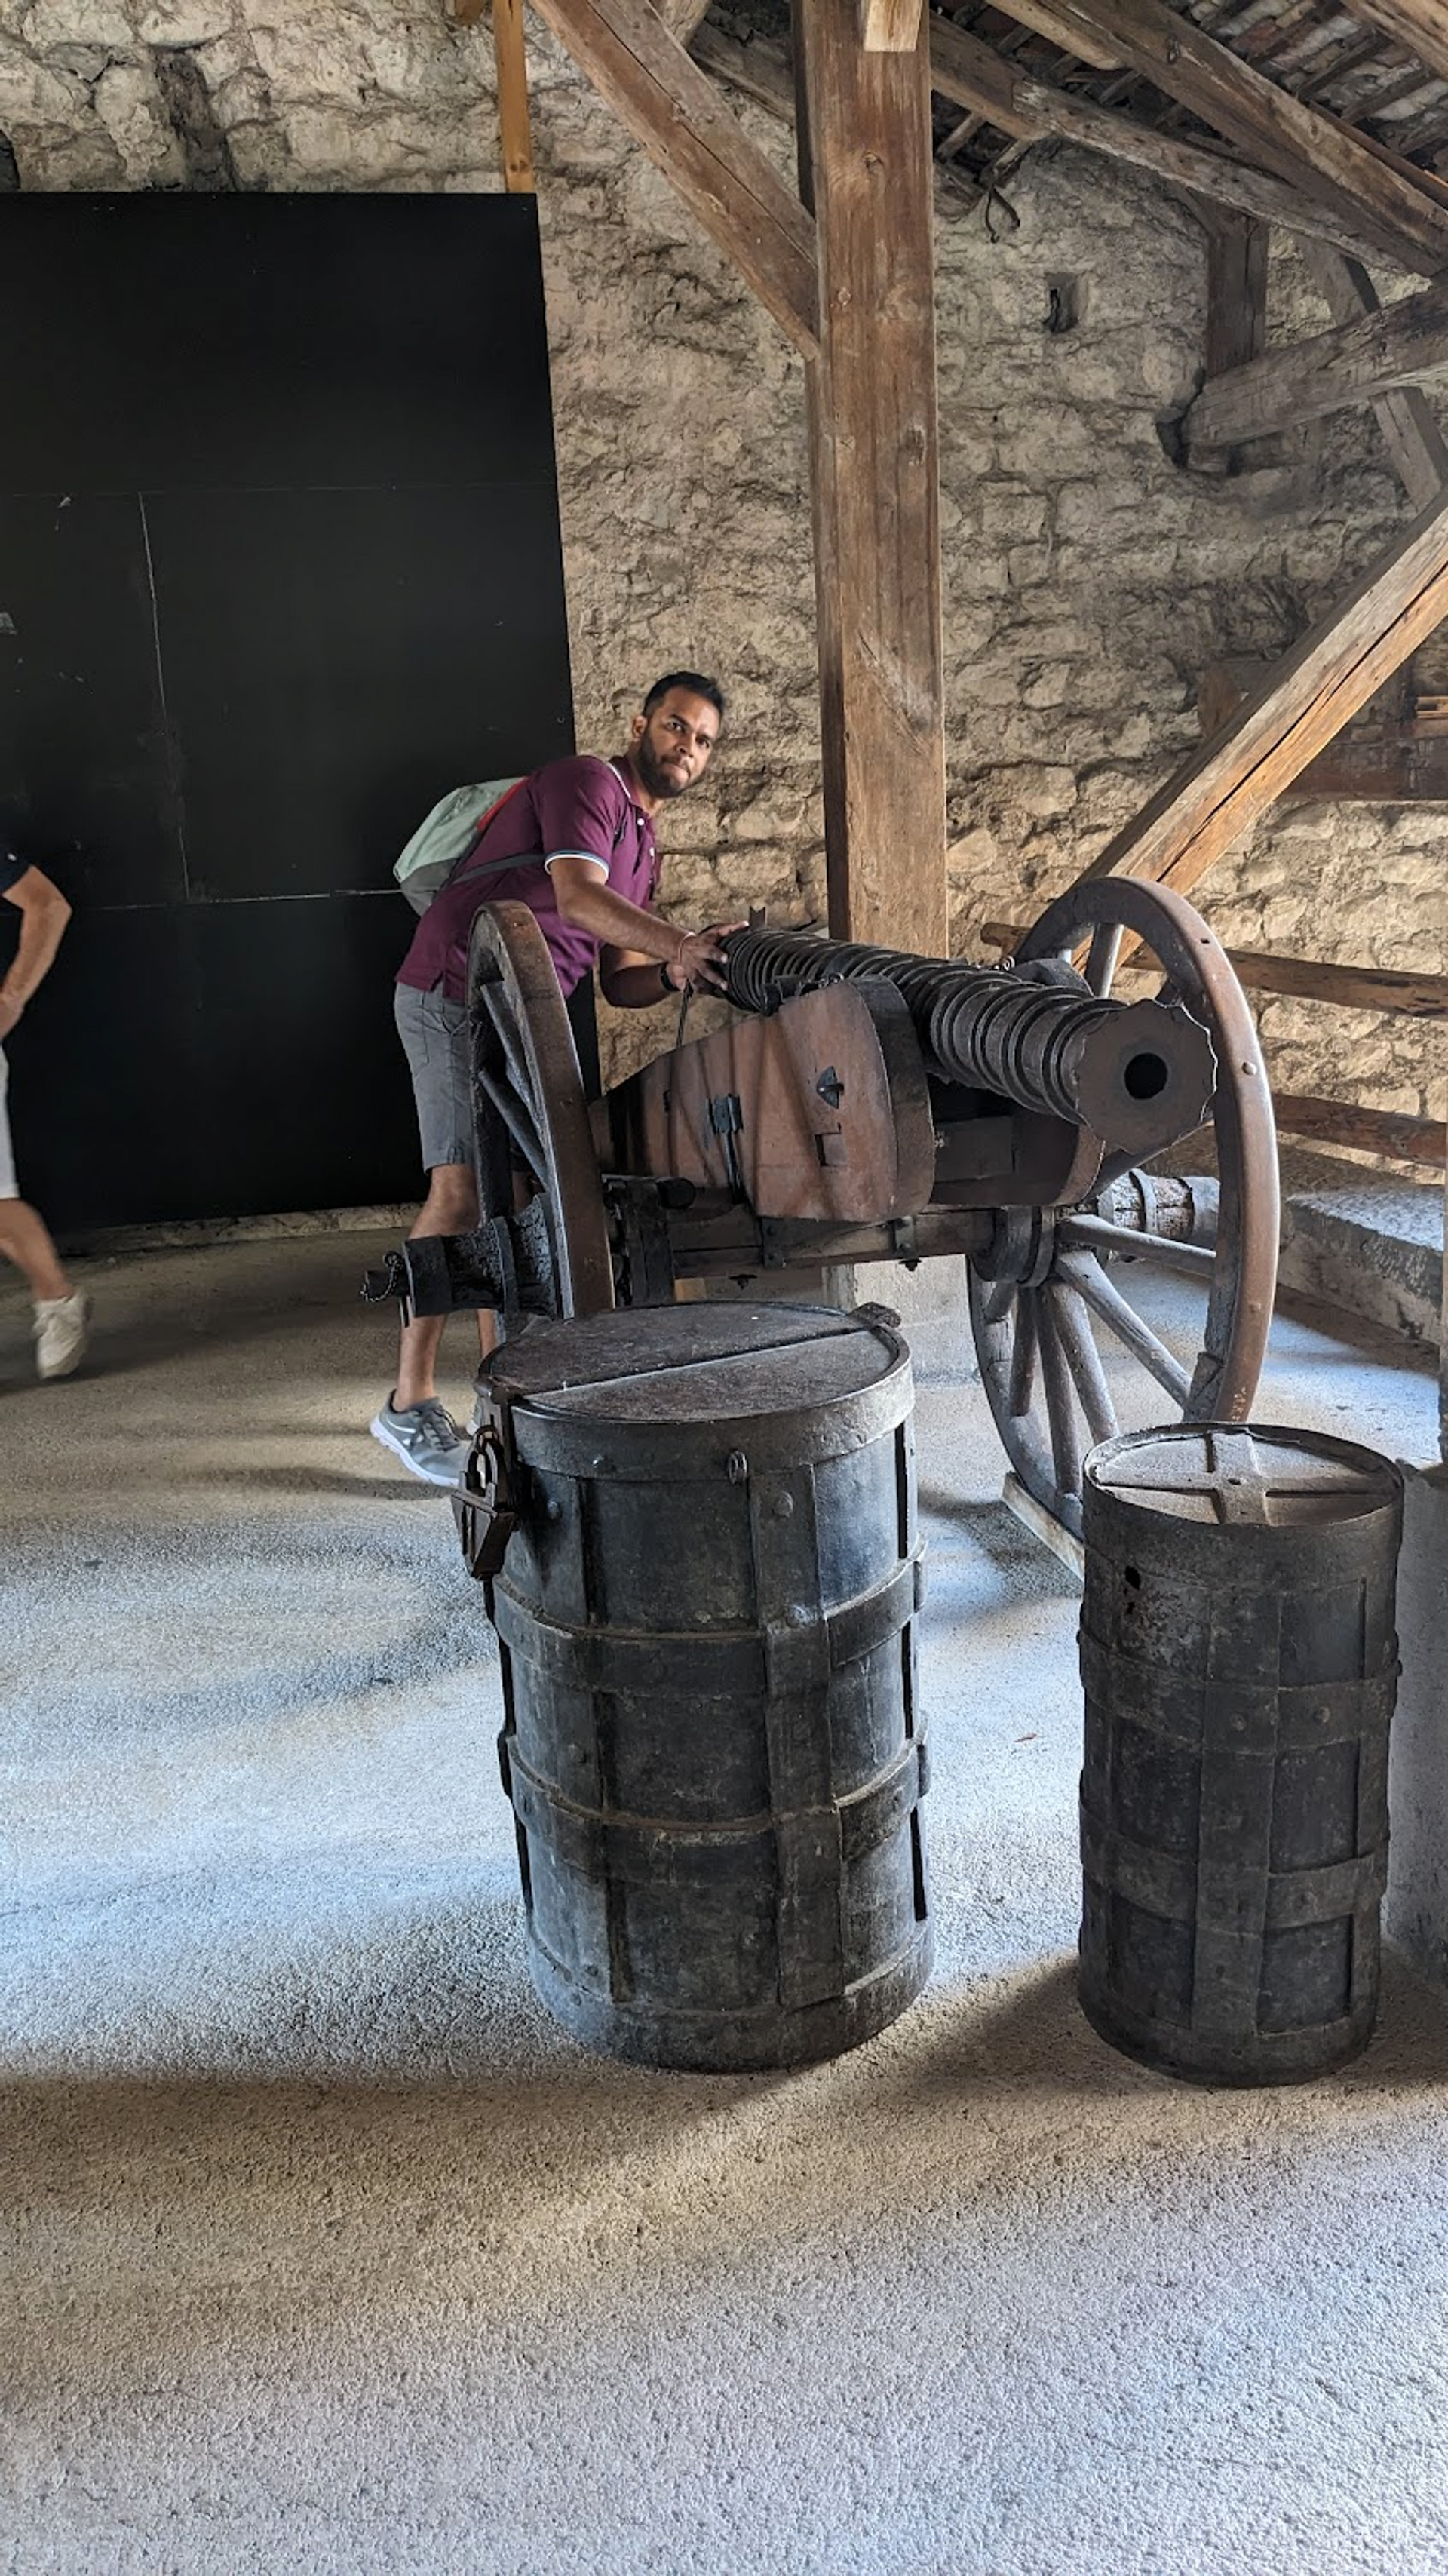 The constipated look on my face on seeing this wonderful cannon.